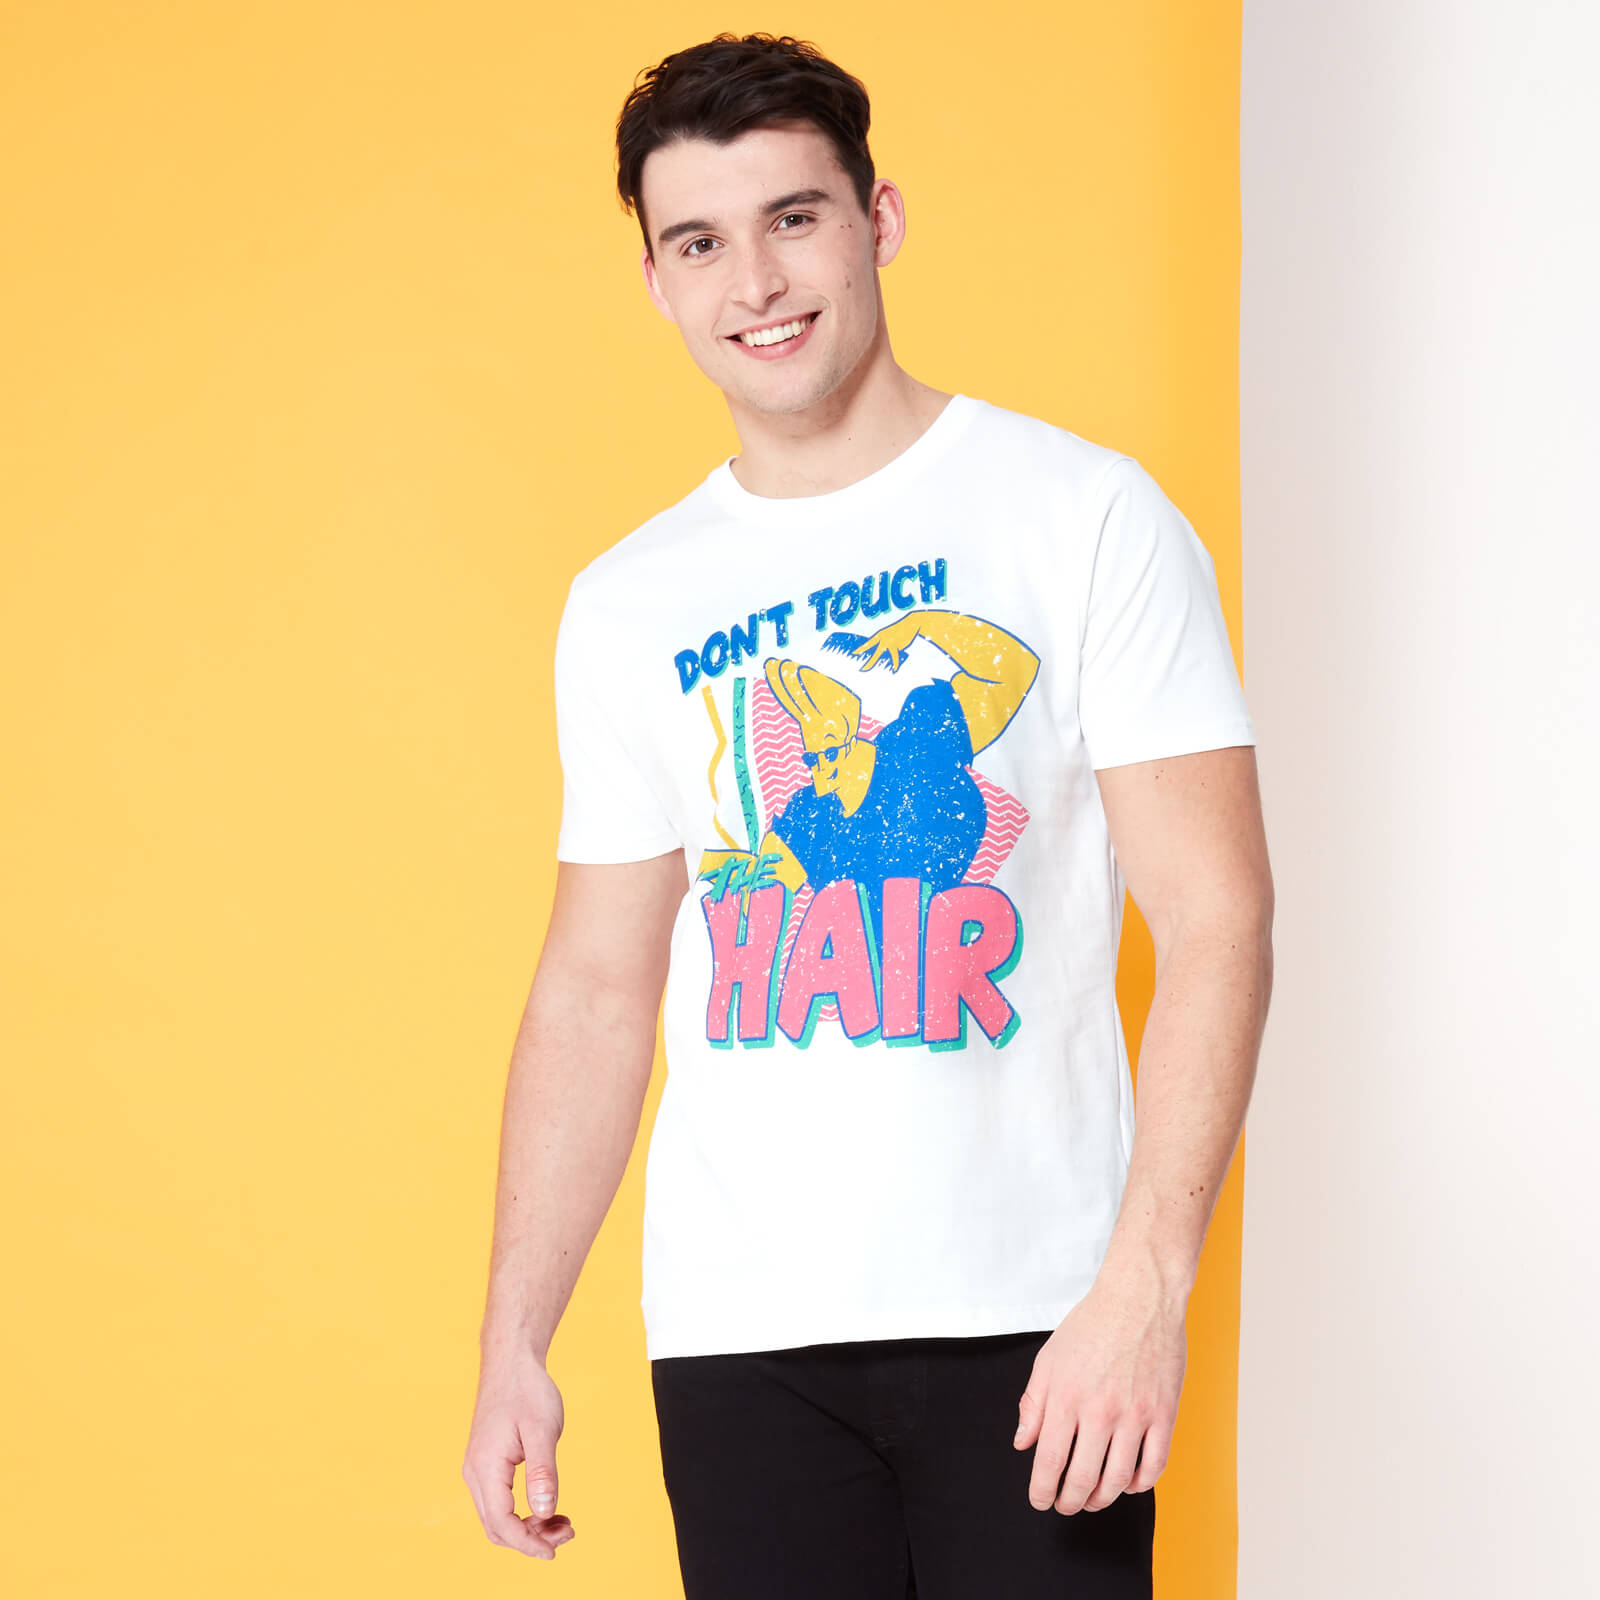 Cartoon Network Spin-Off Johnny Bravo Don't Touch The Hair T-Shirt - White - M - White